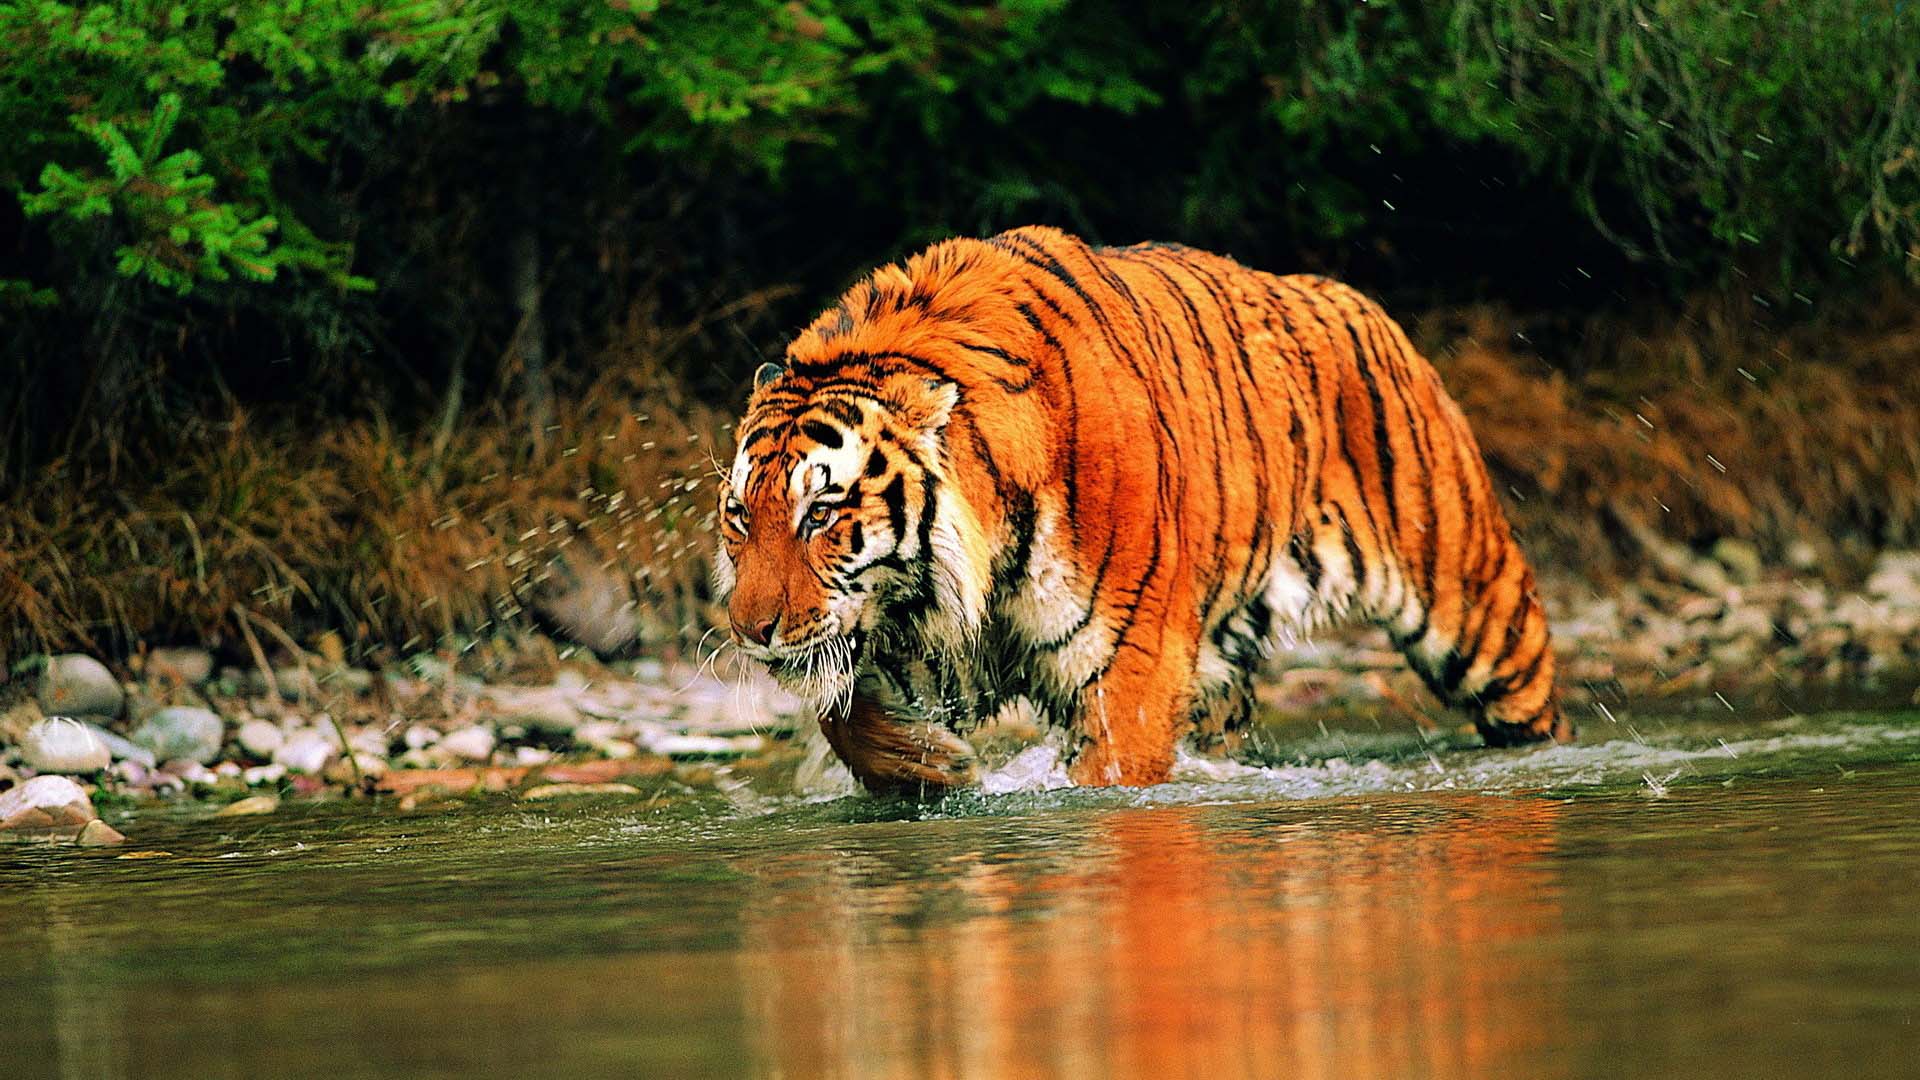 Hd Wallpapers Animals Tigers Download